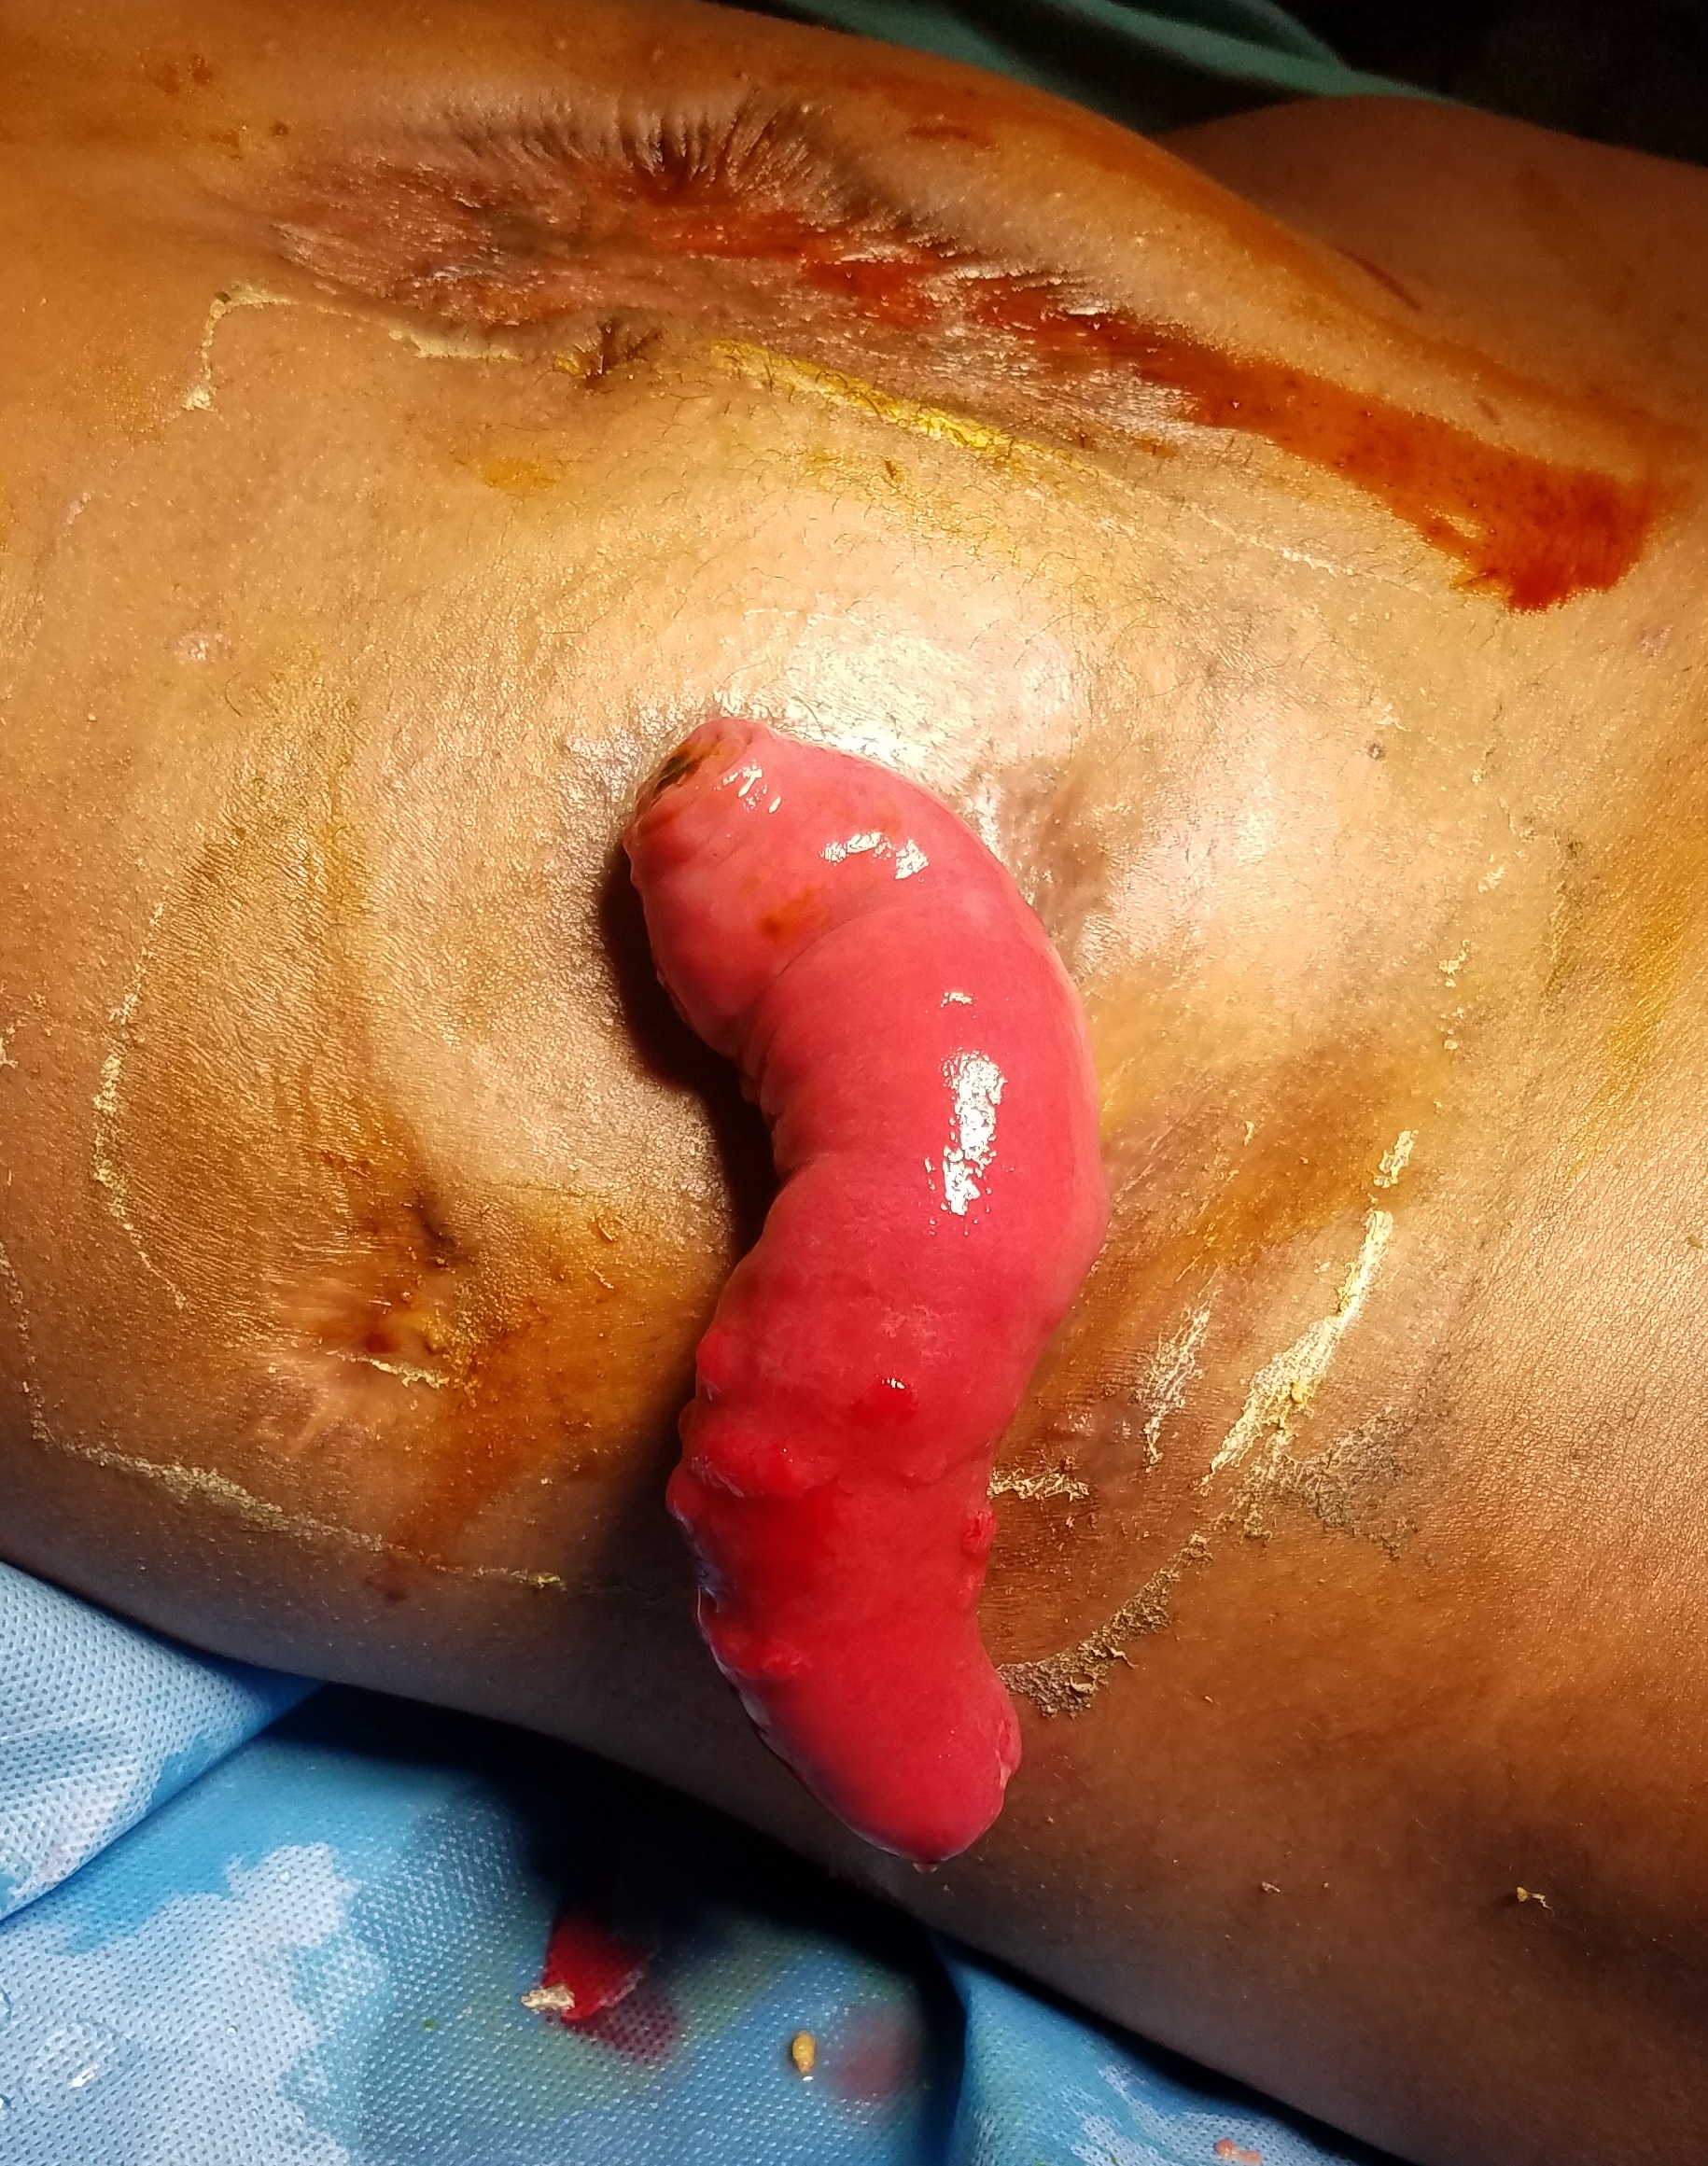 Colostomy prolapse of the distal limb of a stoma given for carcinoma rectum